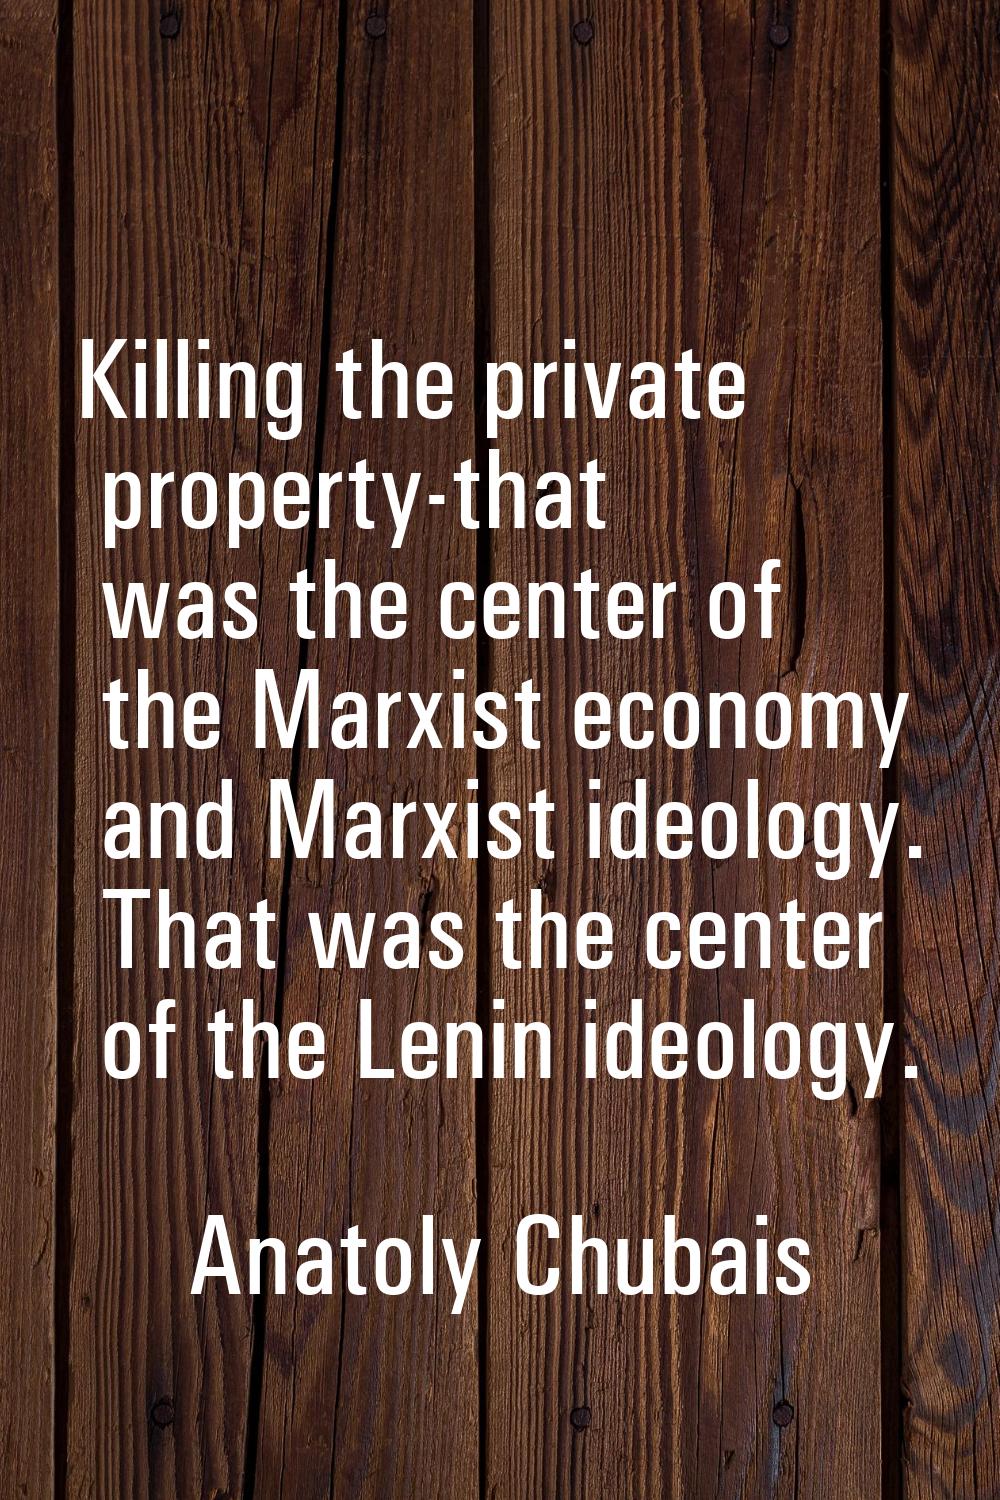 Killing the private property-that was the center of the Marxist economy and Marxist ideology. That 